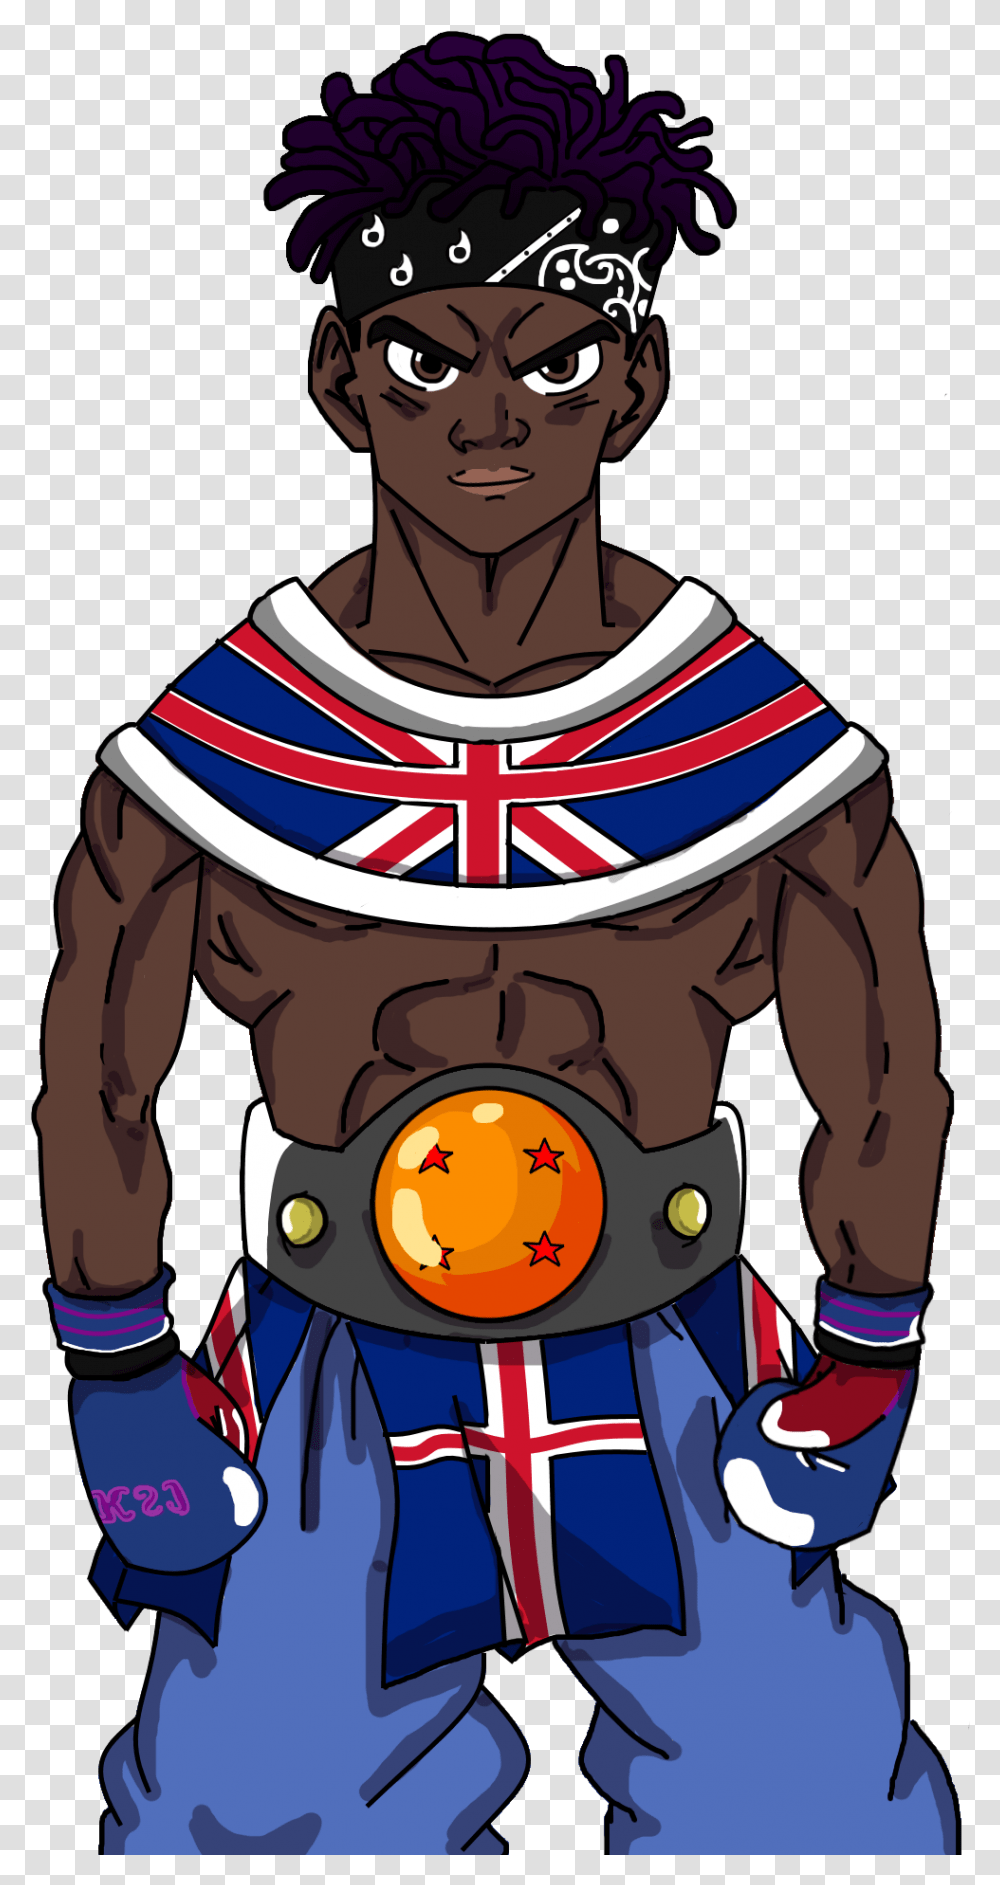 Drew Ksi In A Dragon Ball Ish Style Hope Yall Like It Ksi Ksi Dragon Ball Style, Person, Human, Sailor Suit, Clock Tower Transparent Png